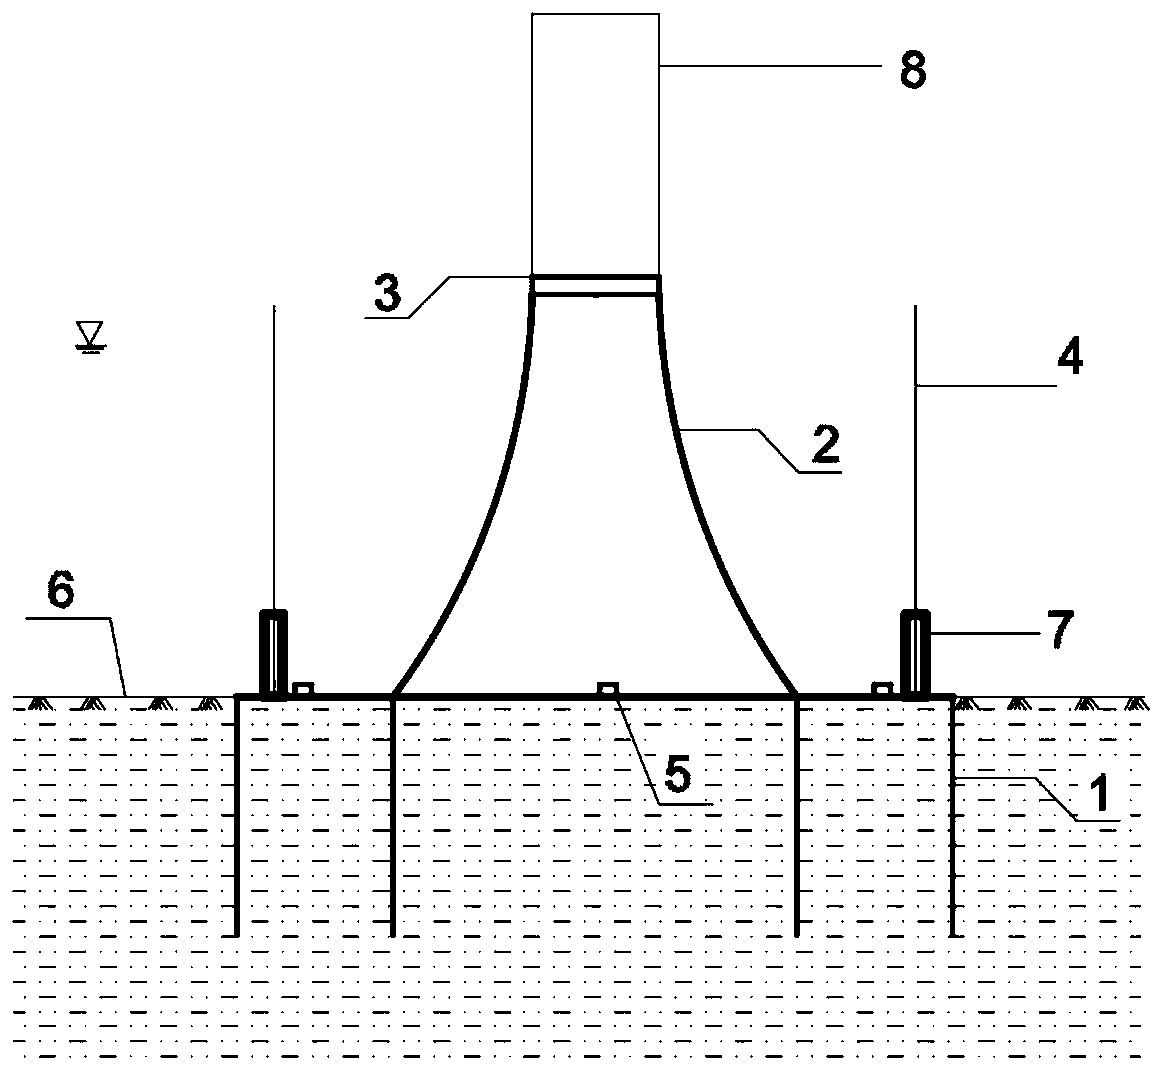 Construction method for recovery of offshore wind-power bucket foundation